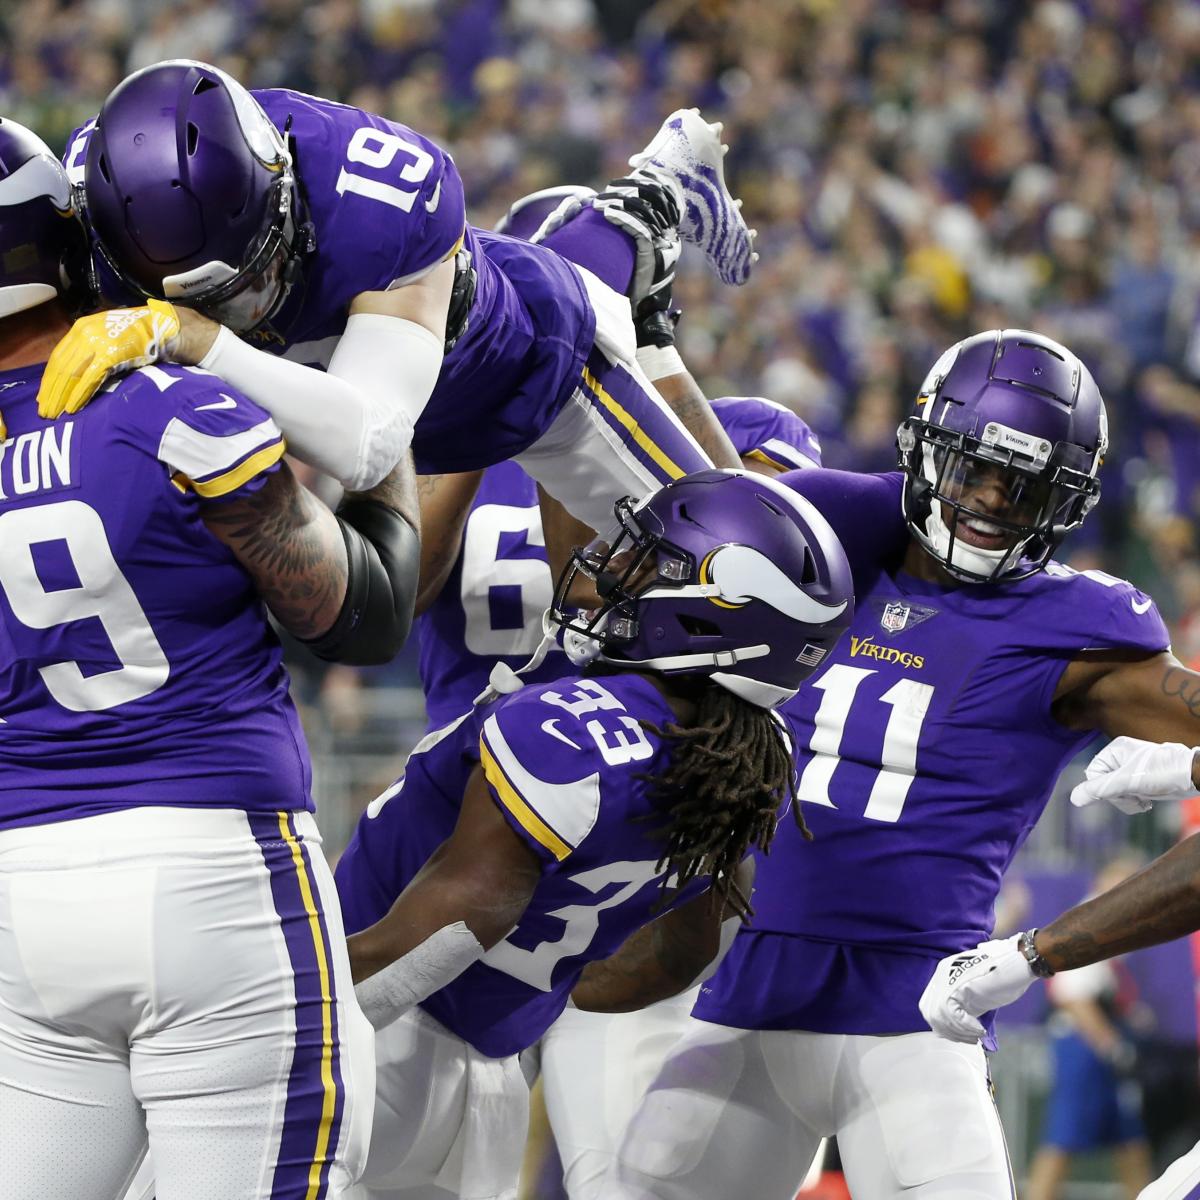 Watch: Vikings play limbo in touchdown celebration vs. Packers